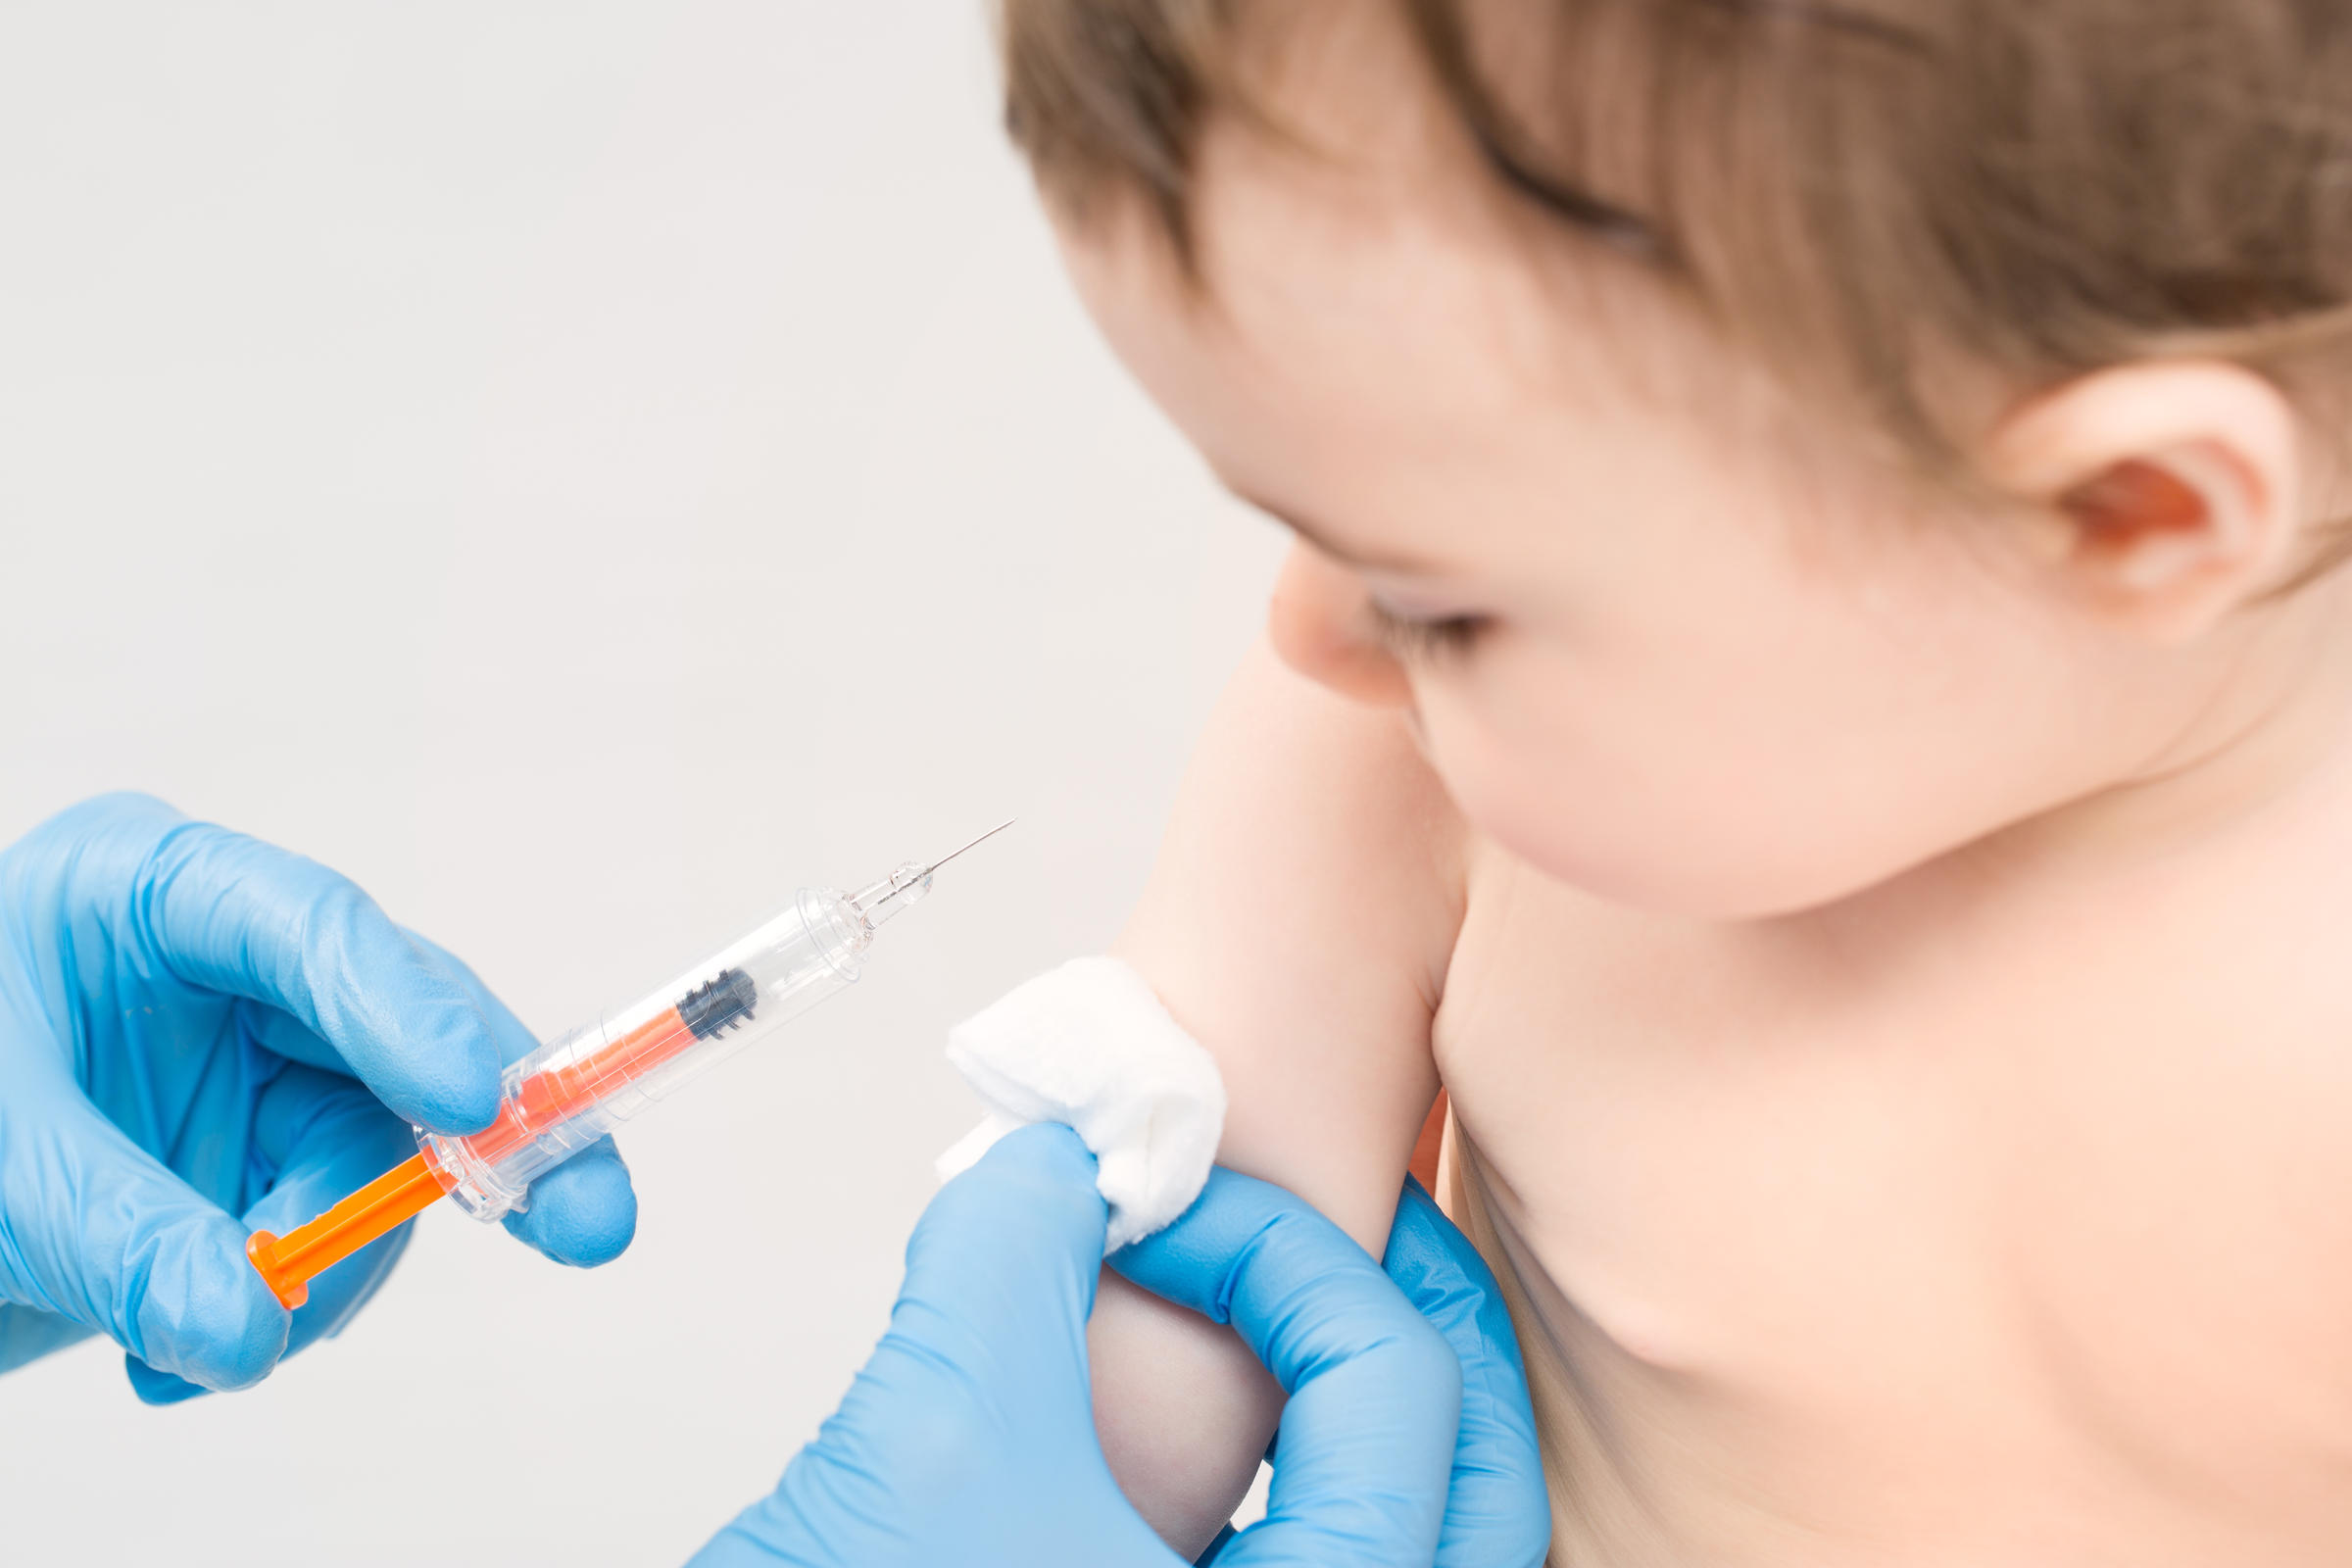 Florida urges vaccinations after 3 measles cases reported